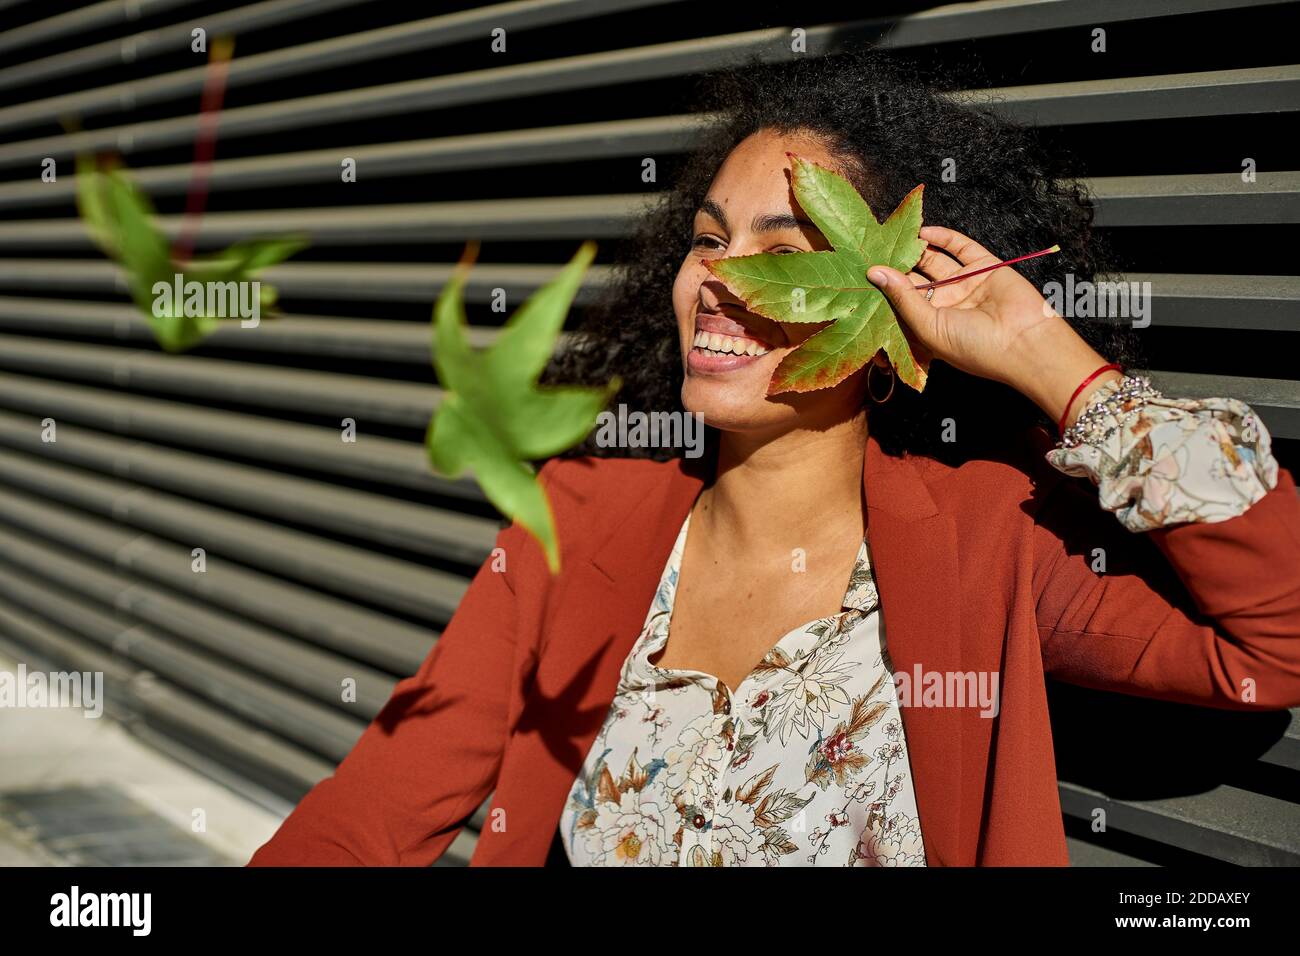 Autumn leaves falling on smiling young woman against shutter during sunny day Stock Photo